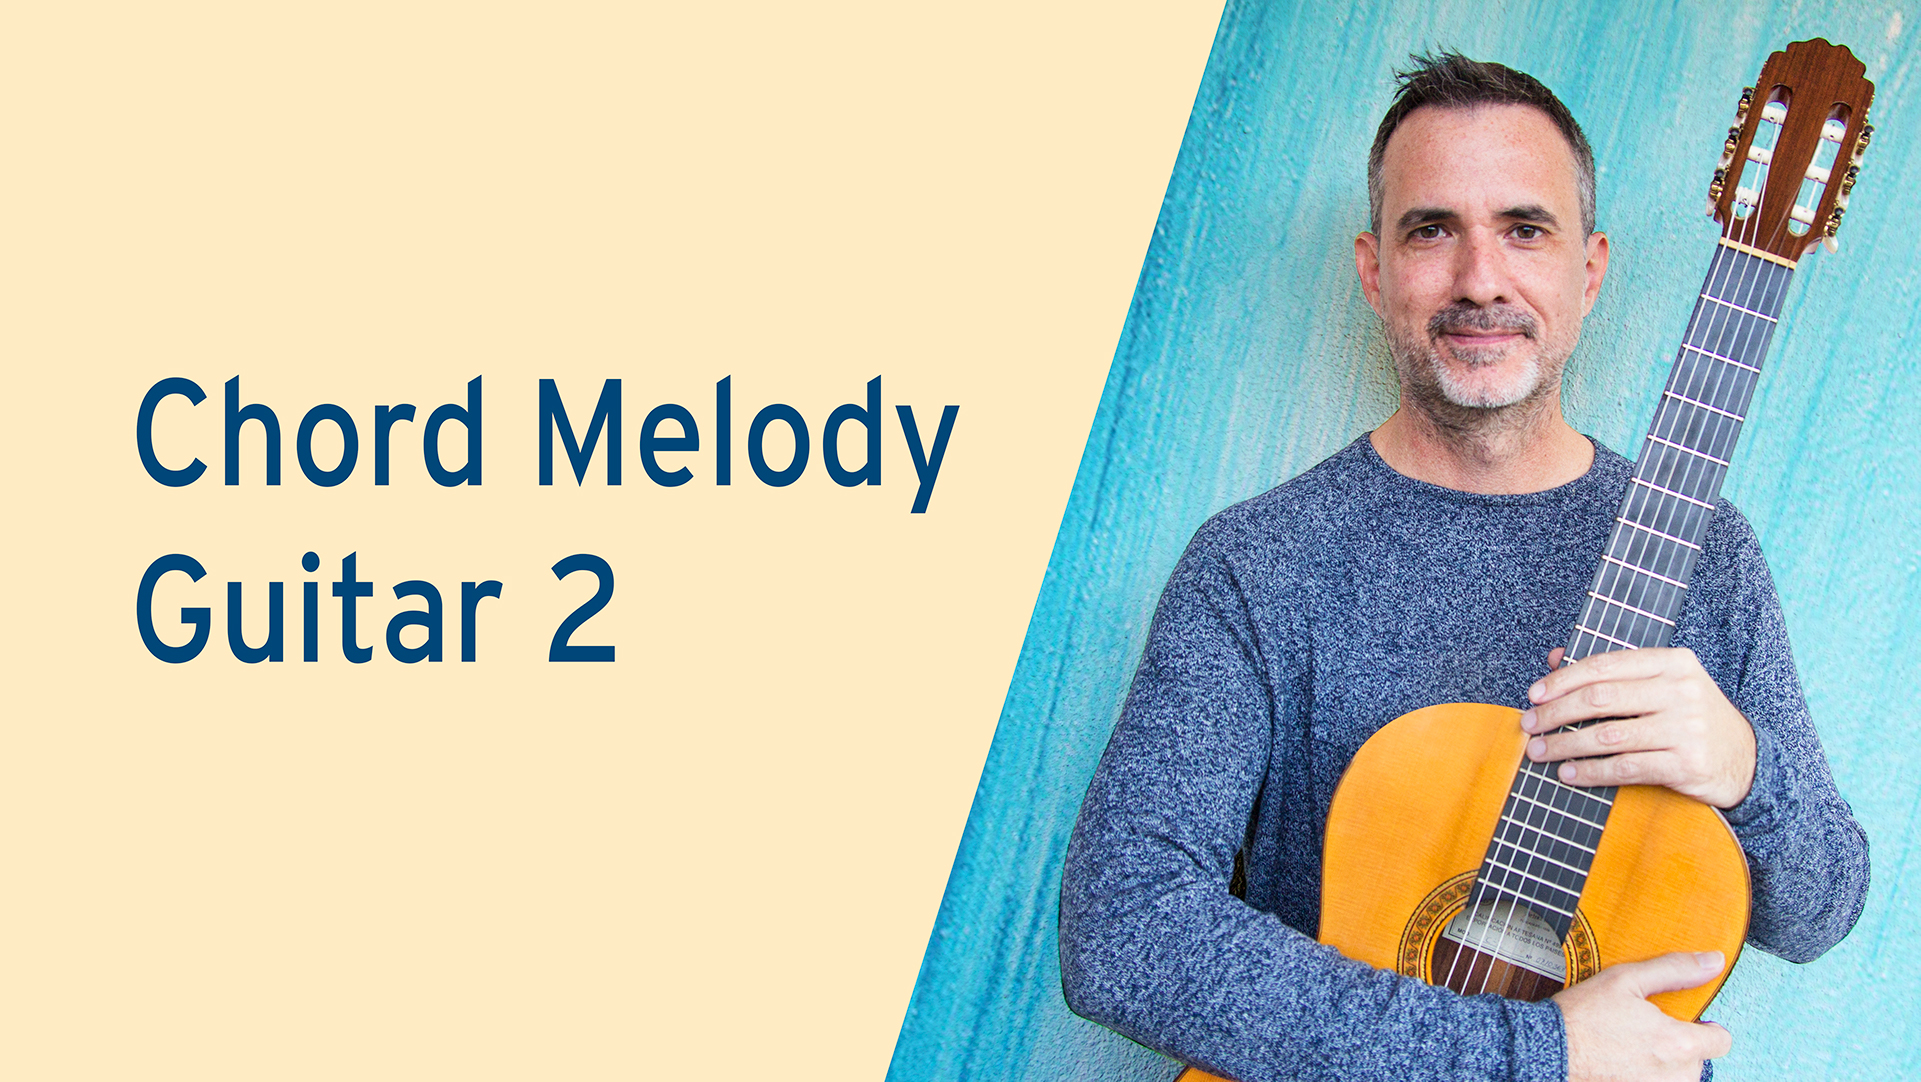 Improvise for Real - Chord Melody Guitar 2